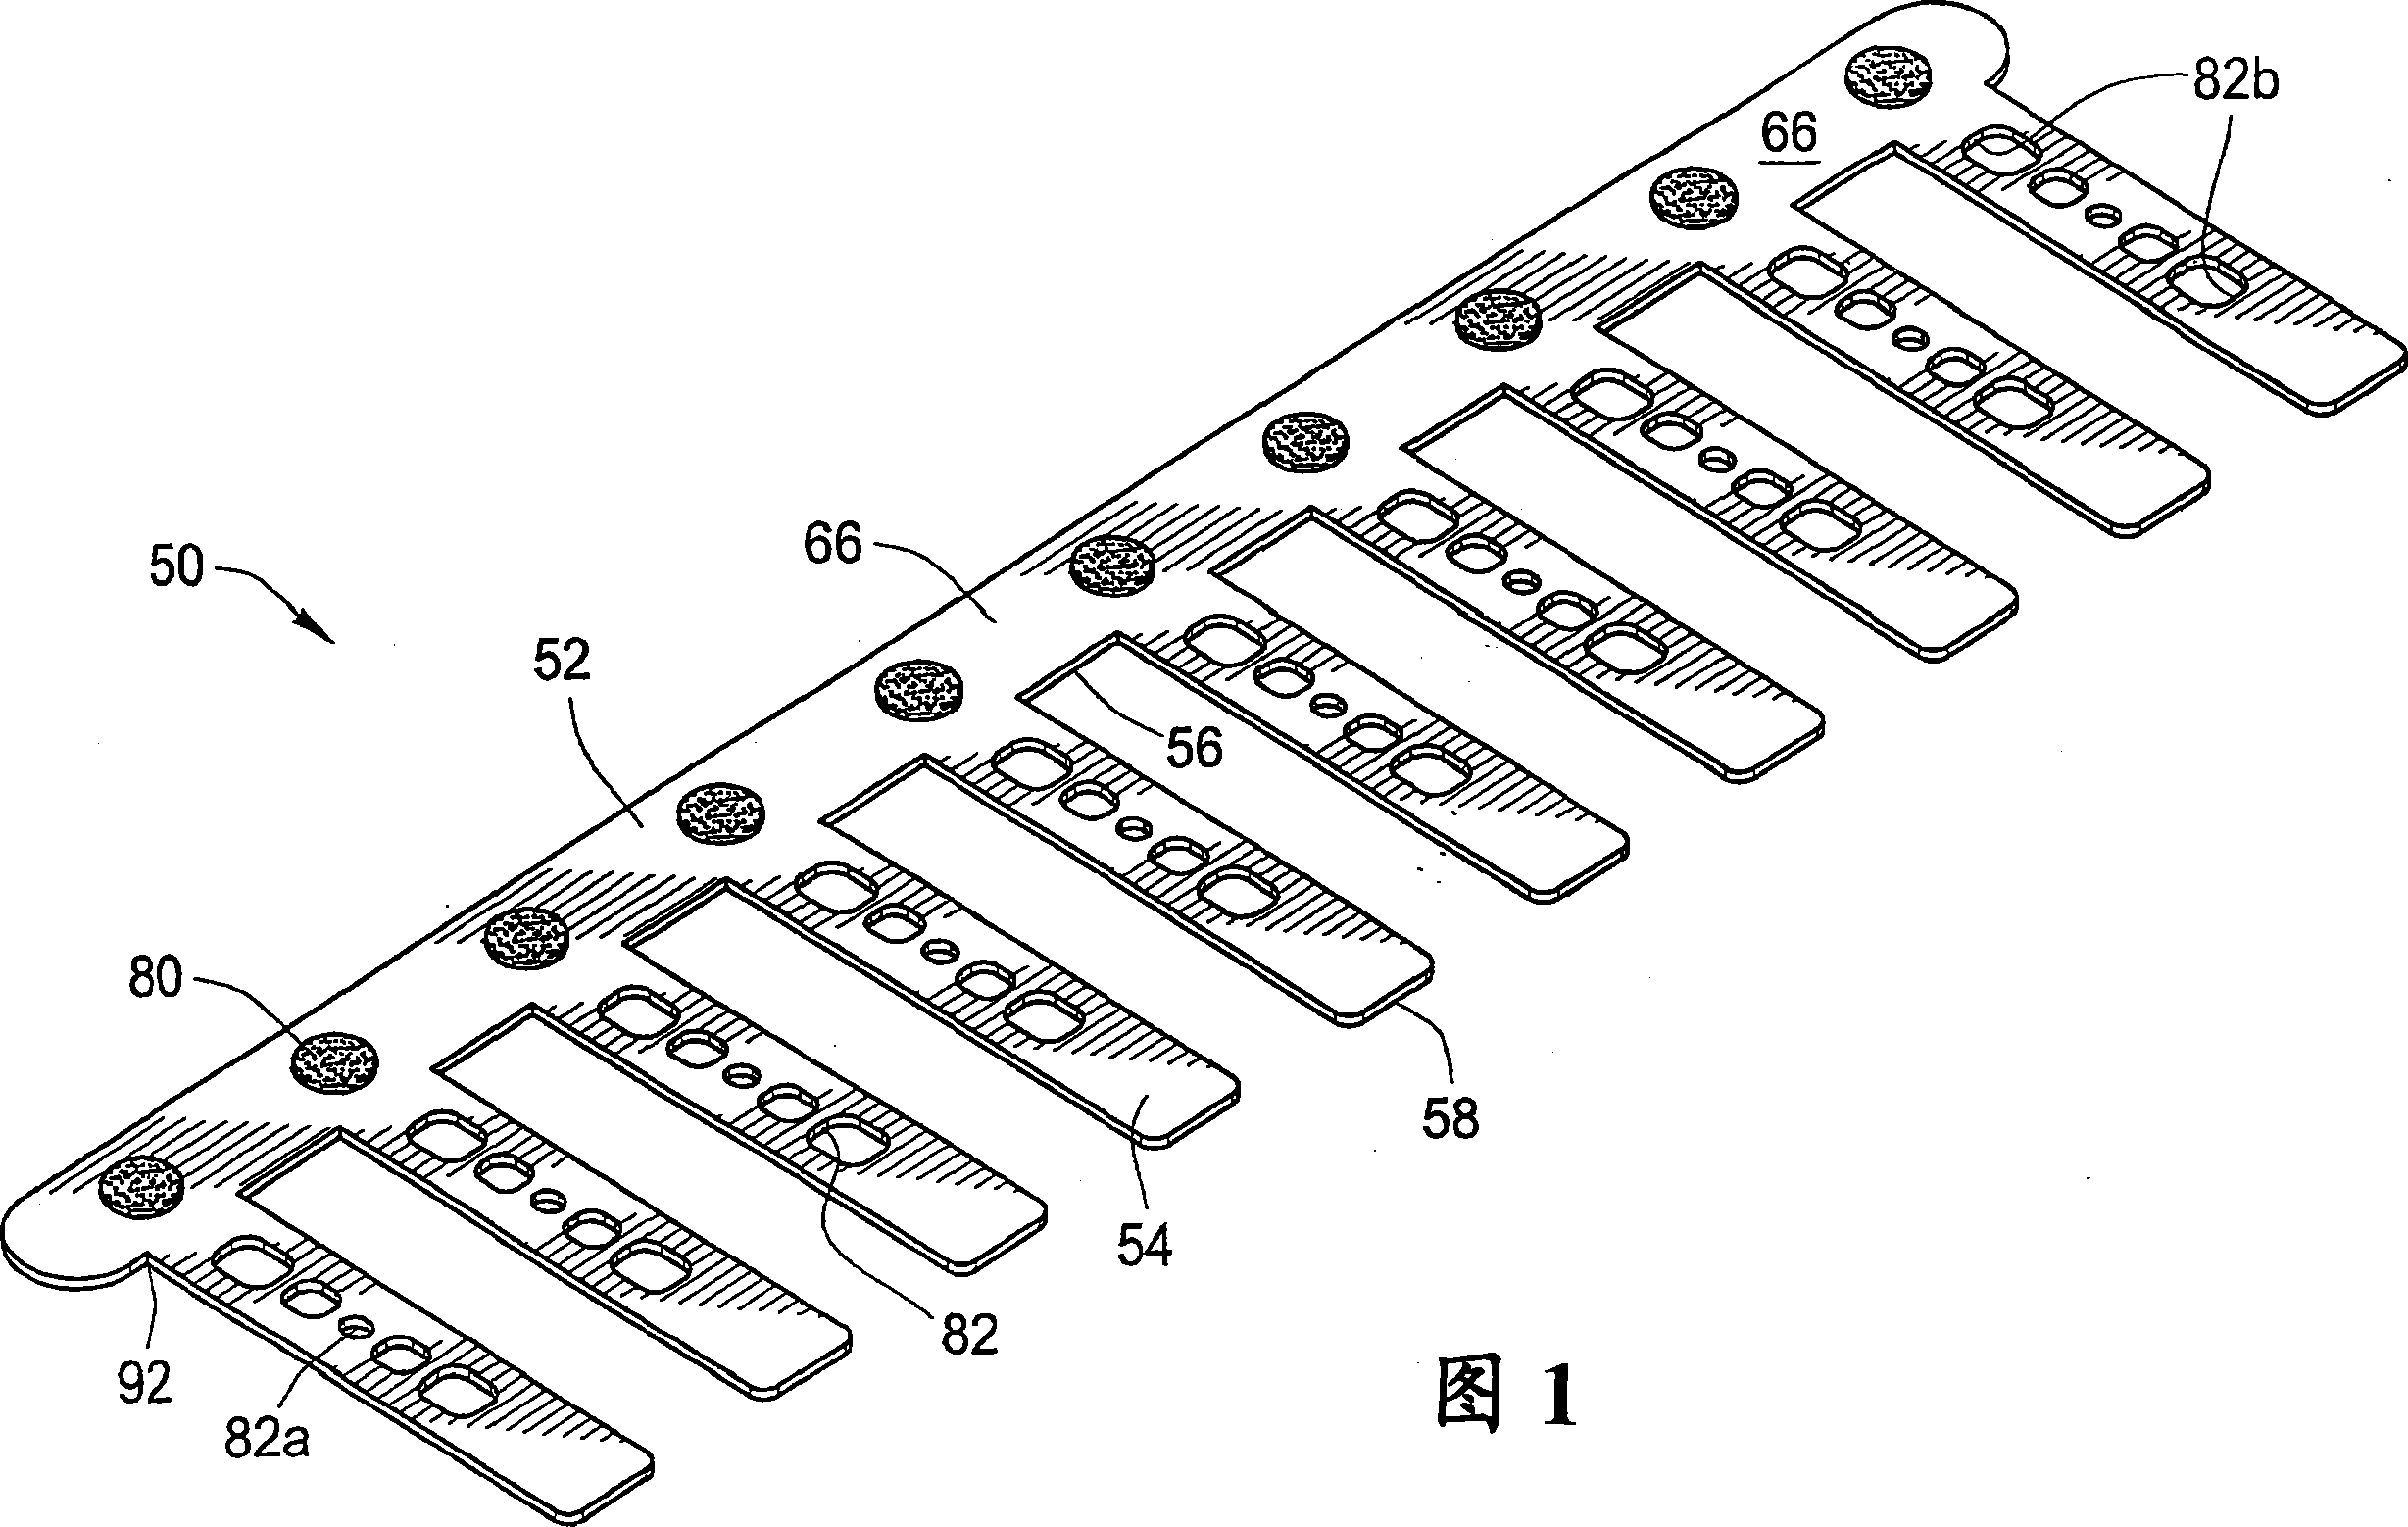 Binding element and plurality of binding elements particularly suited for automated processes